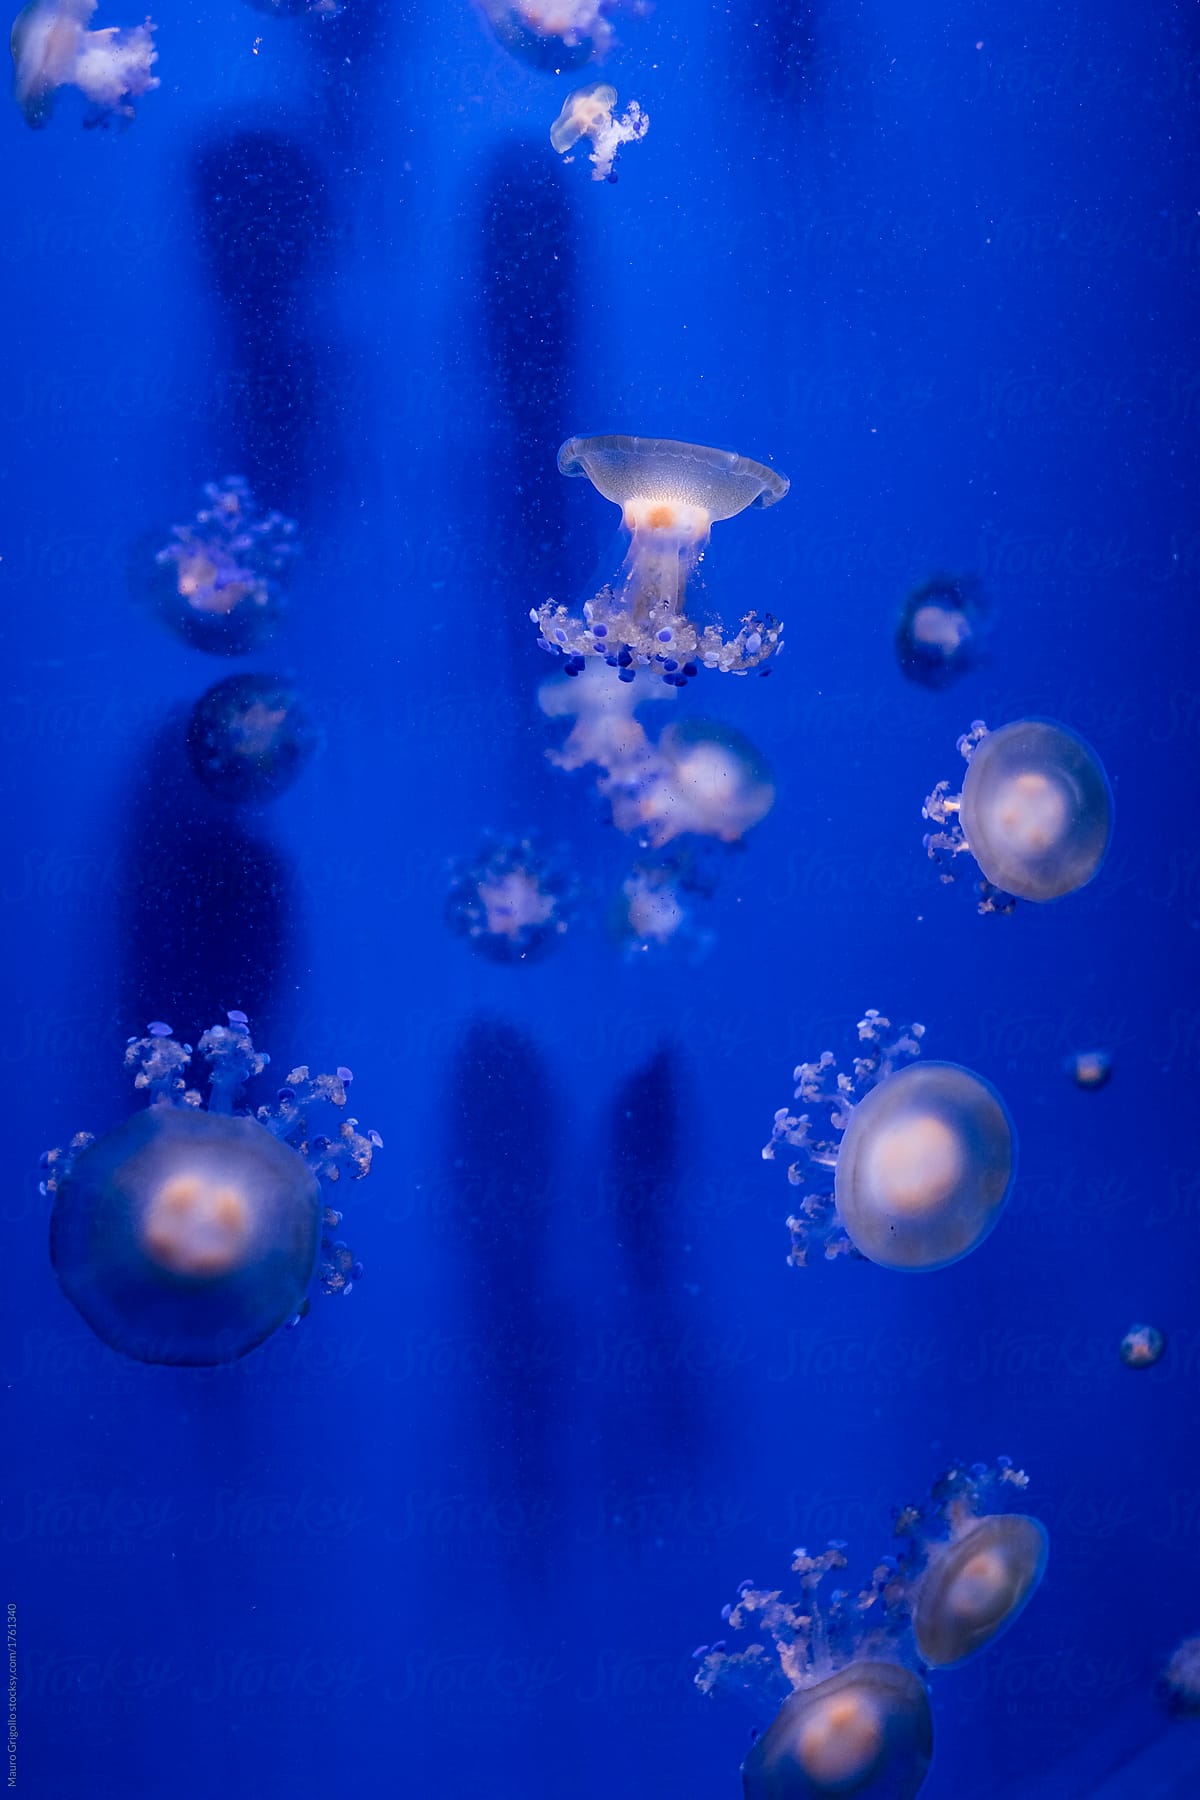 jellyfish floats in blue water